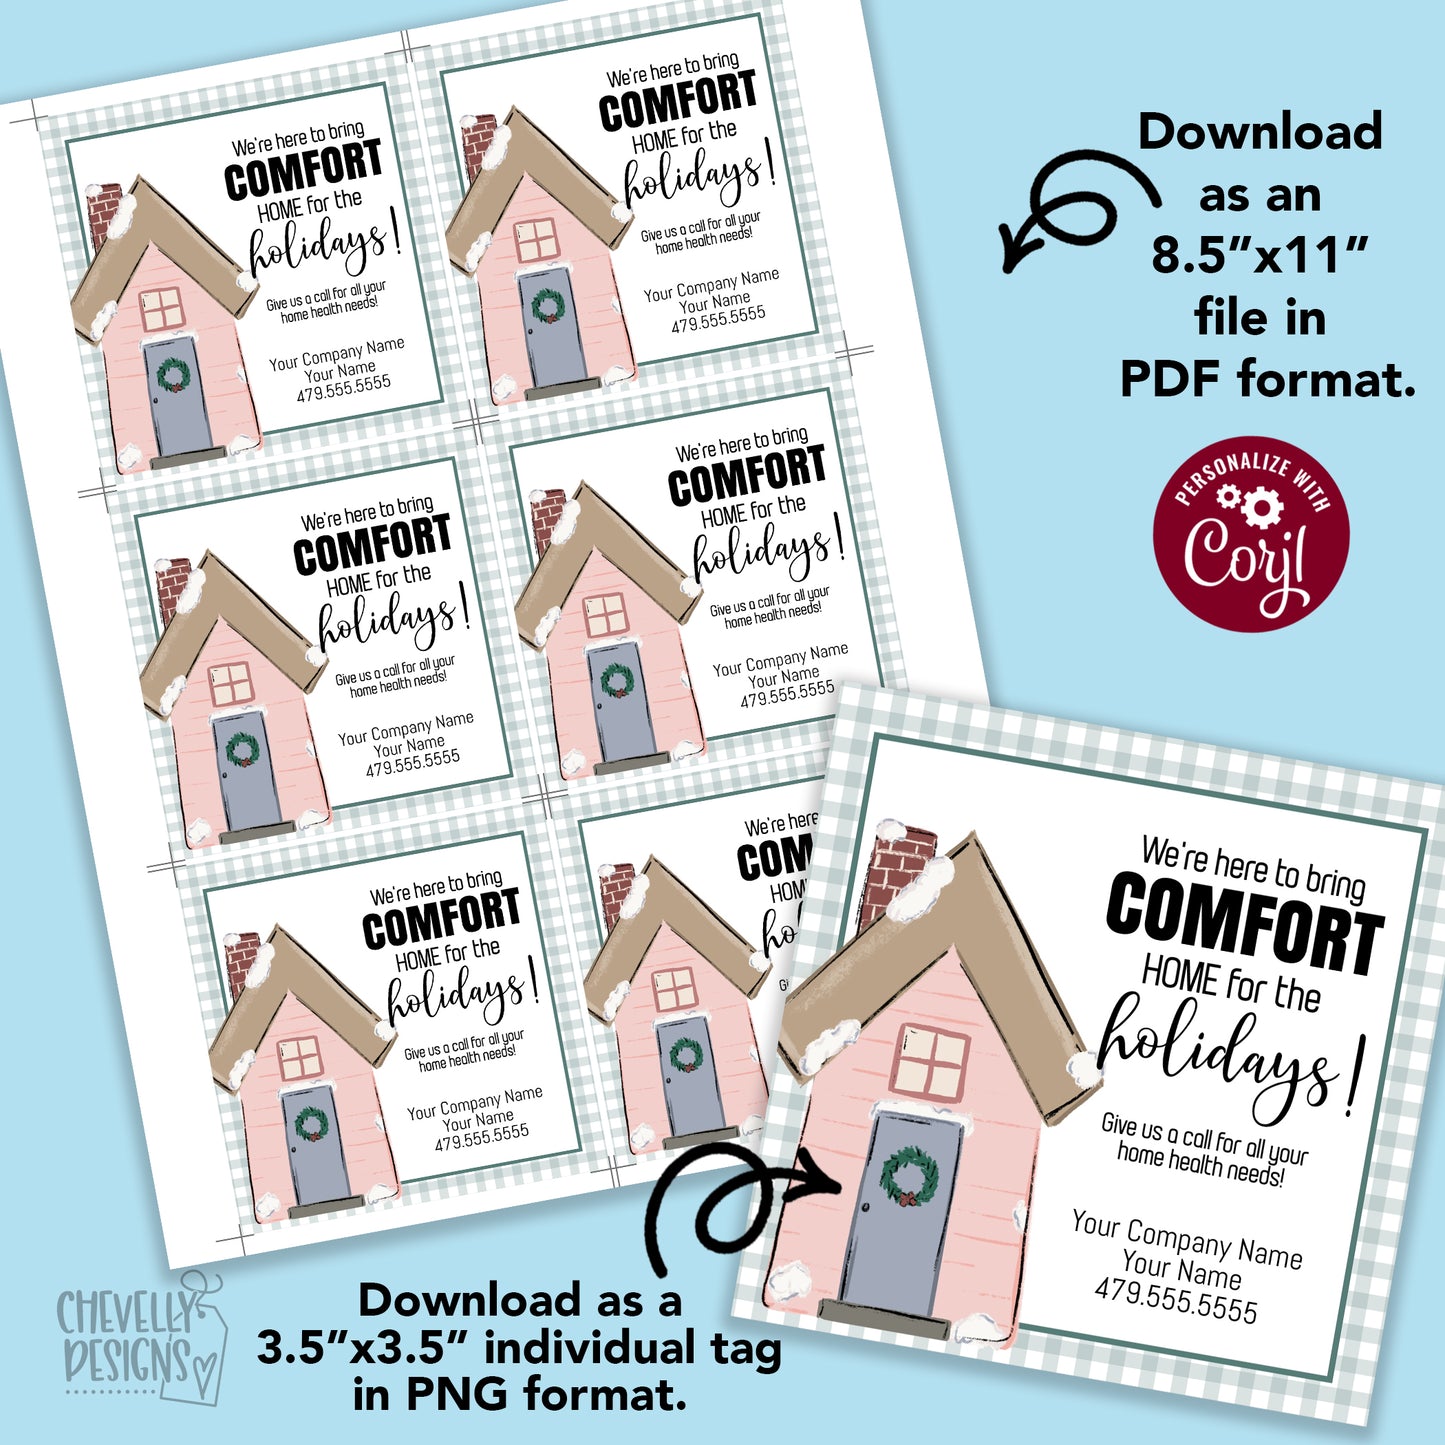 EDITABLE - Bring Comfort Home for the Holidays - Home Health Referral Gift Tags - Printable Digital File